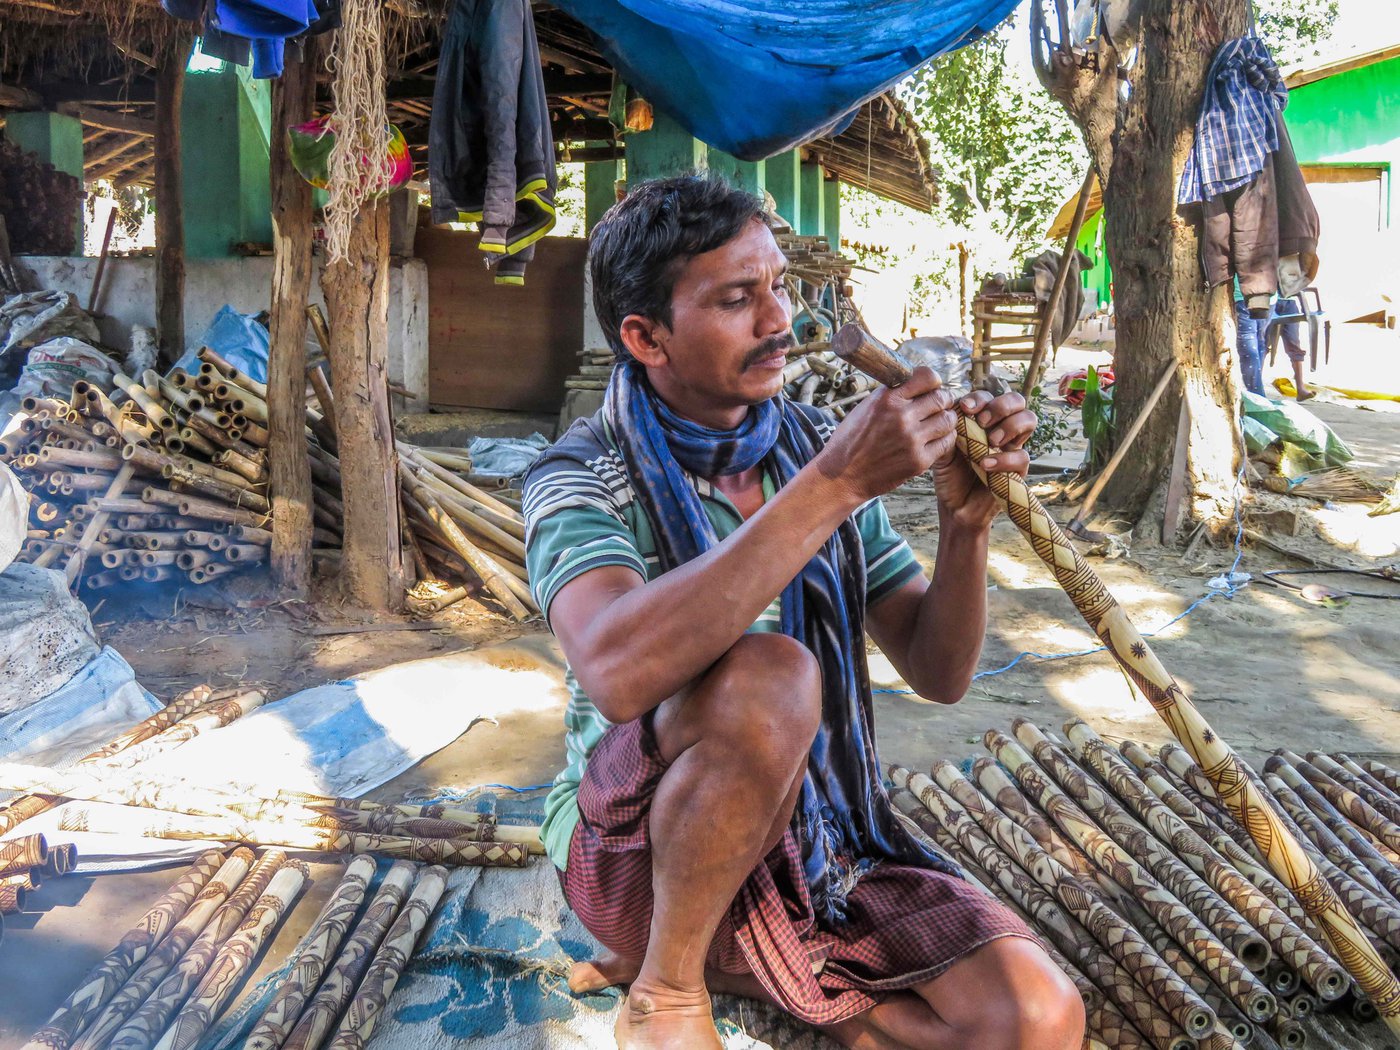 Maniram Mandawi, a flute-maker from the Gond Adivasi community in Chhatisgarh’s Narayanpur district, recalls a time when forests were rich in animals, trees and bamboo for his signature 'swinging flute'